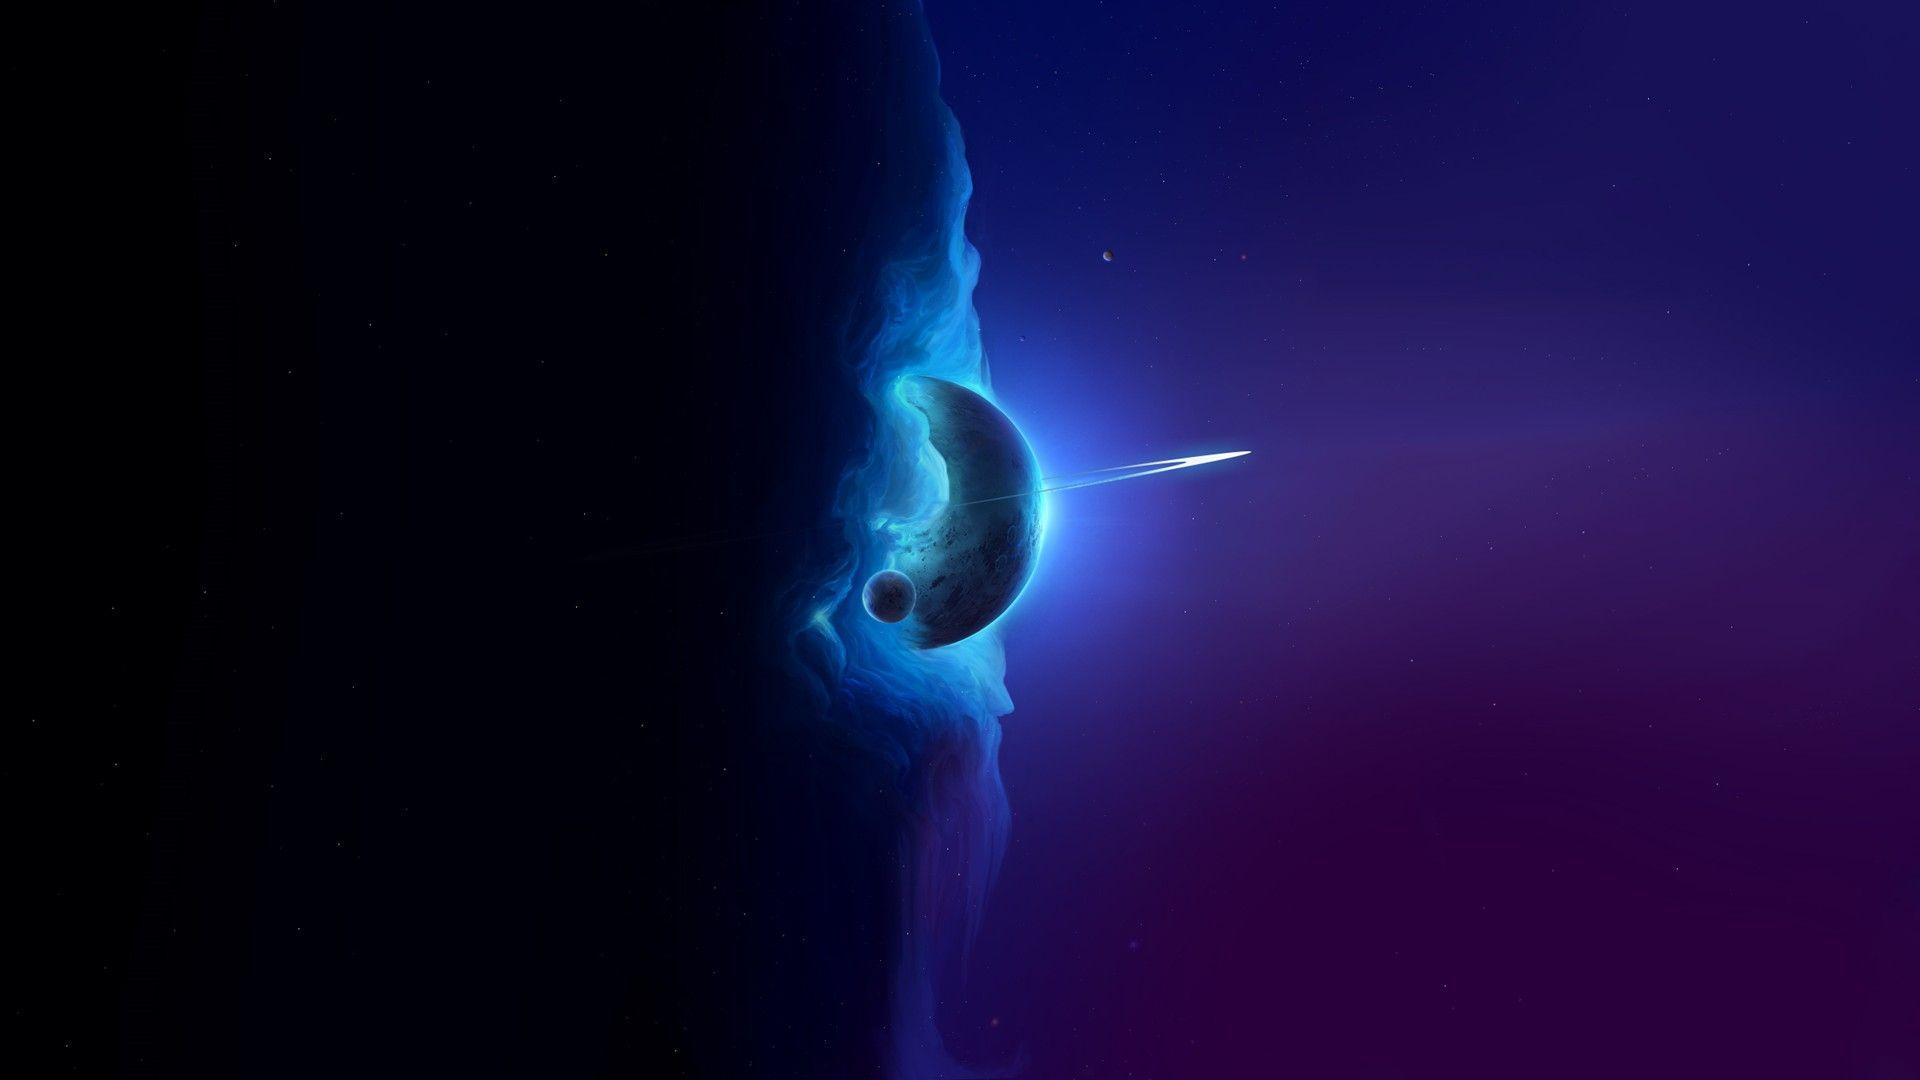 Wallpapers black hole